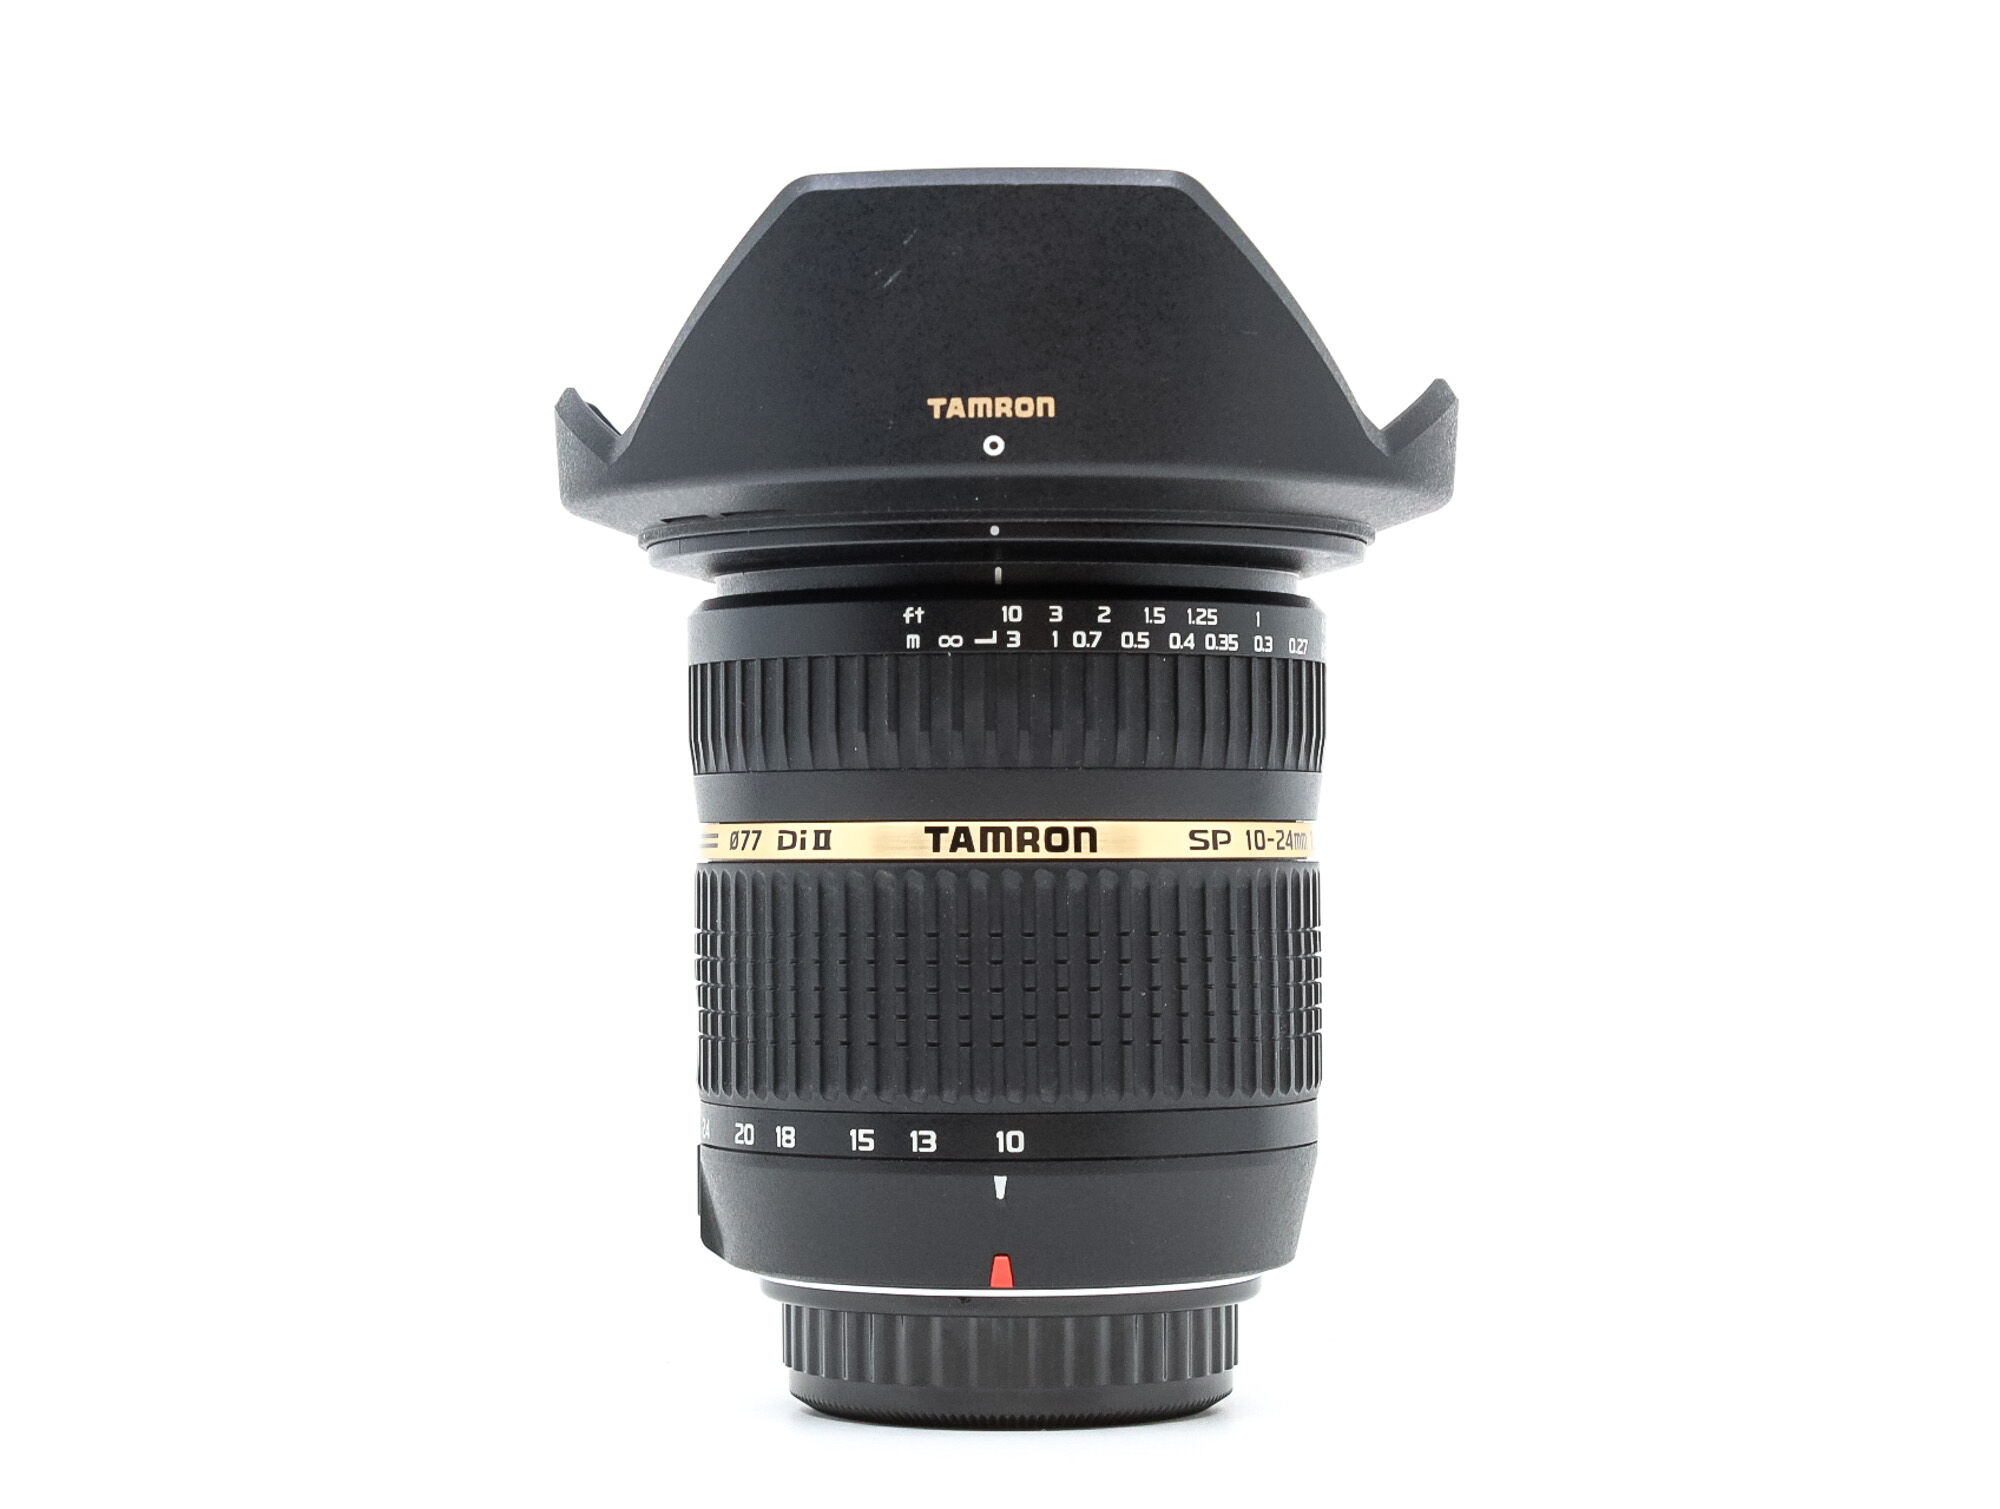 tamron sp af 10-24mm f/3.5-4.5 di ii ld aspherical (if) pentax fit (condition: good)